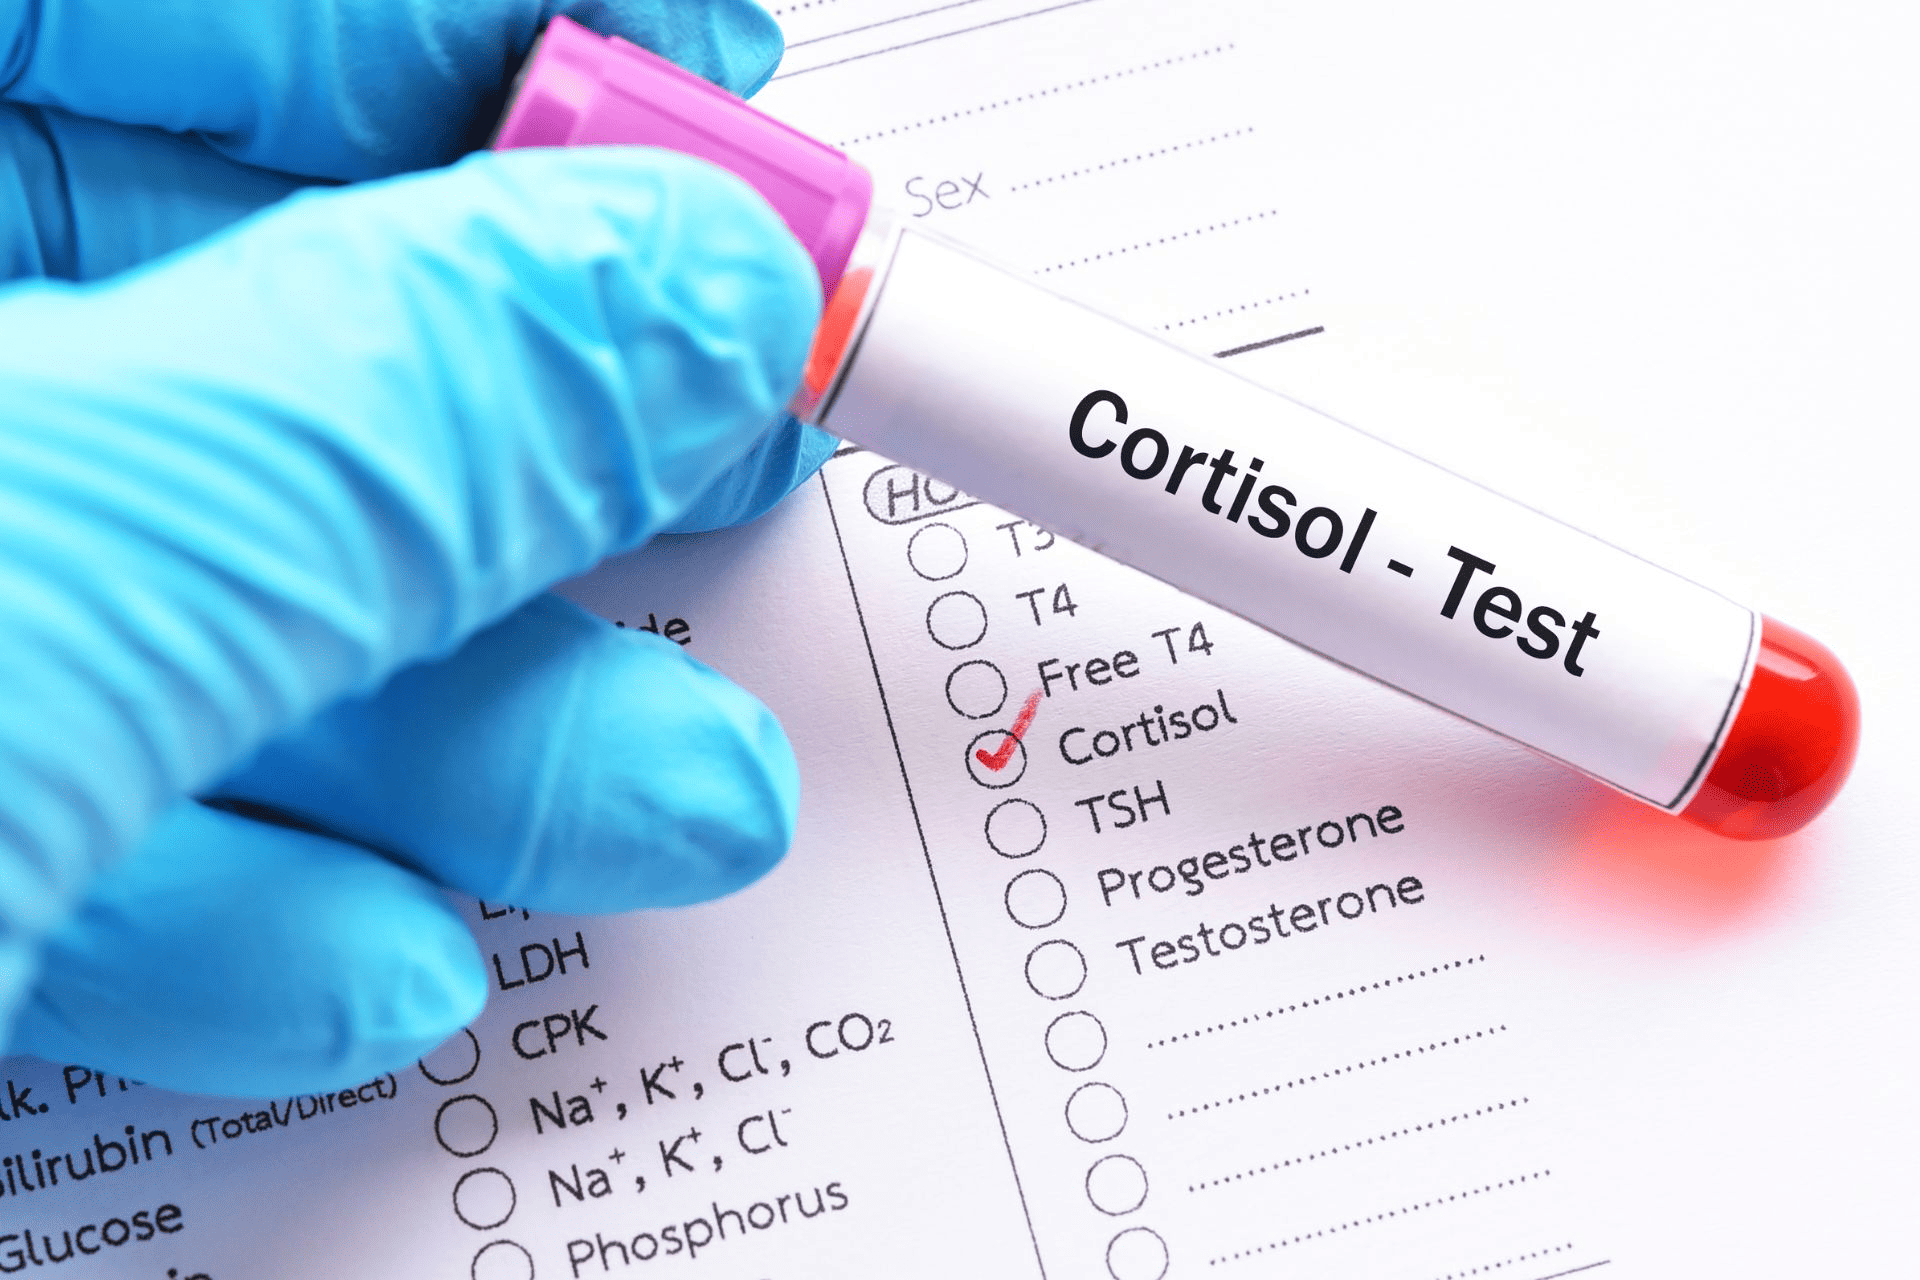 A cortisol test to determine hormone levels.
